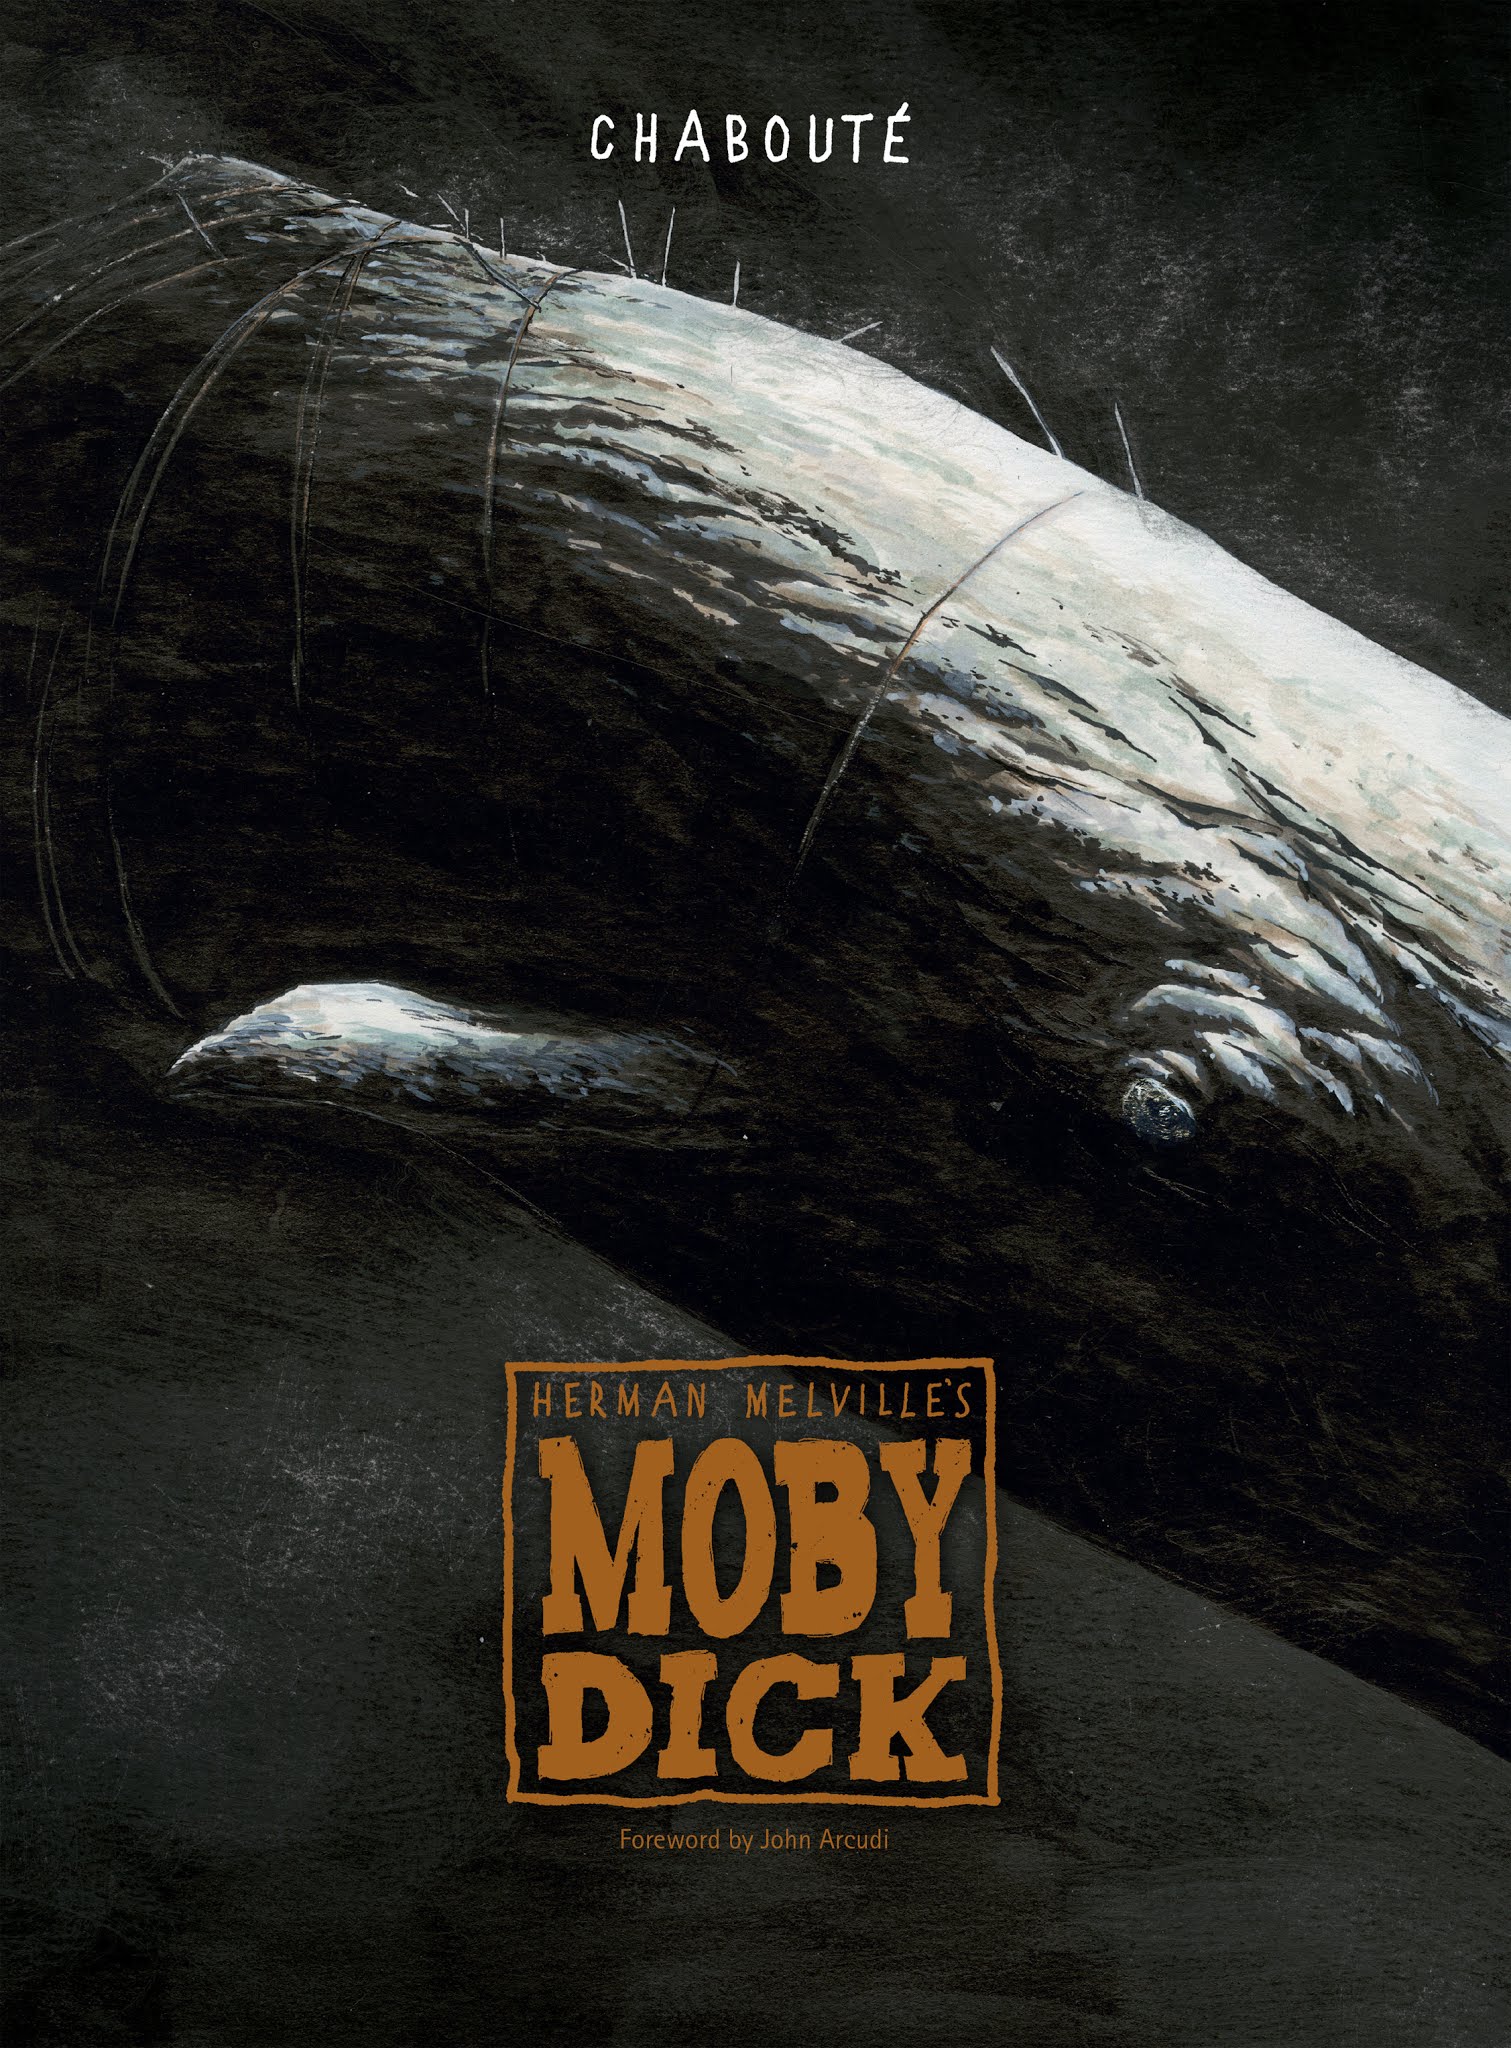 Read online Moby Dick comic -  Issue # TPB (Part 1) - 1